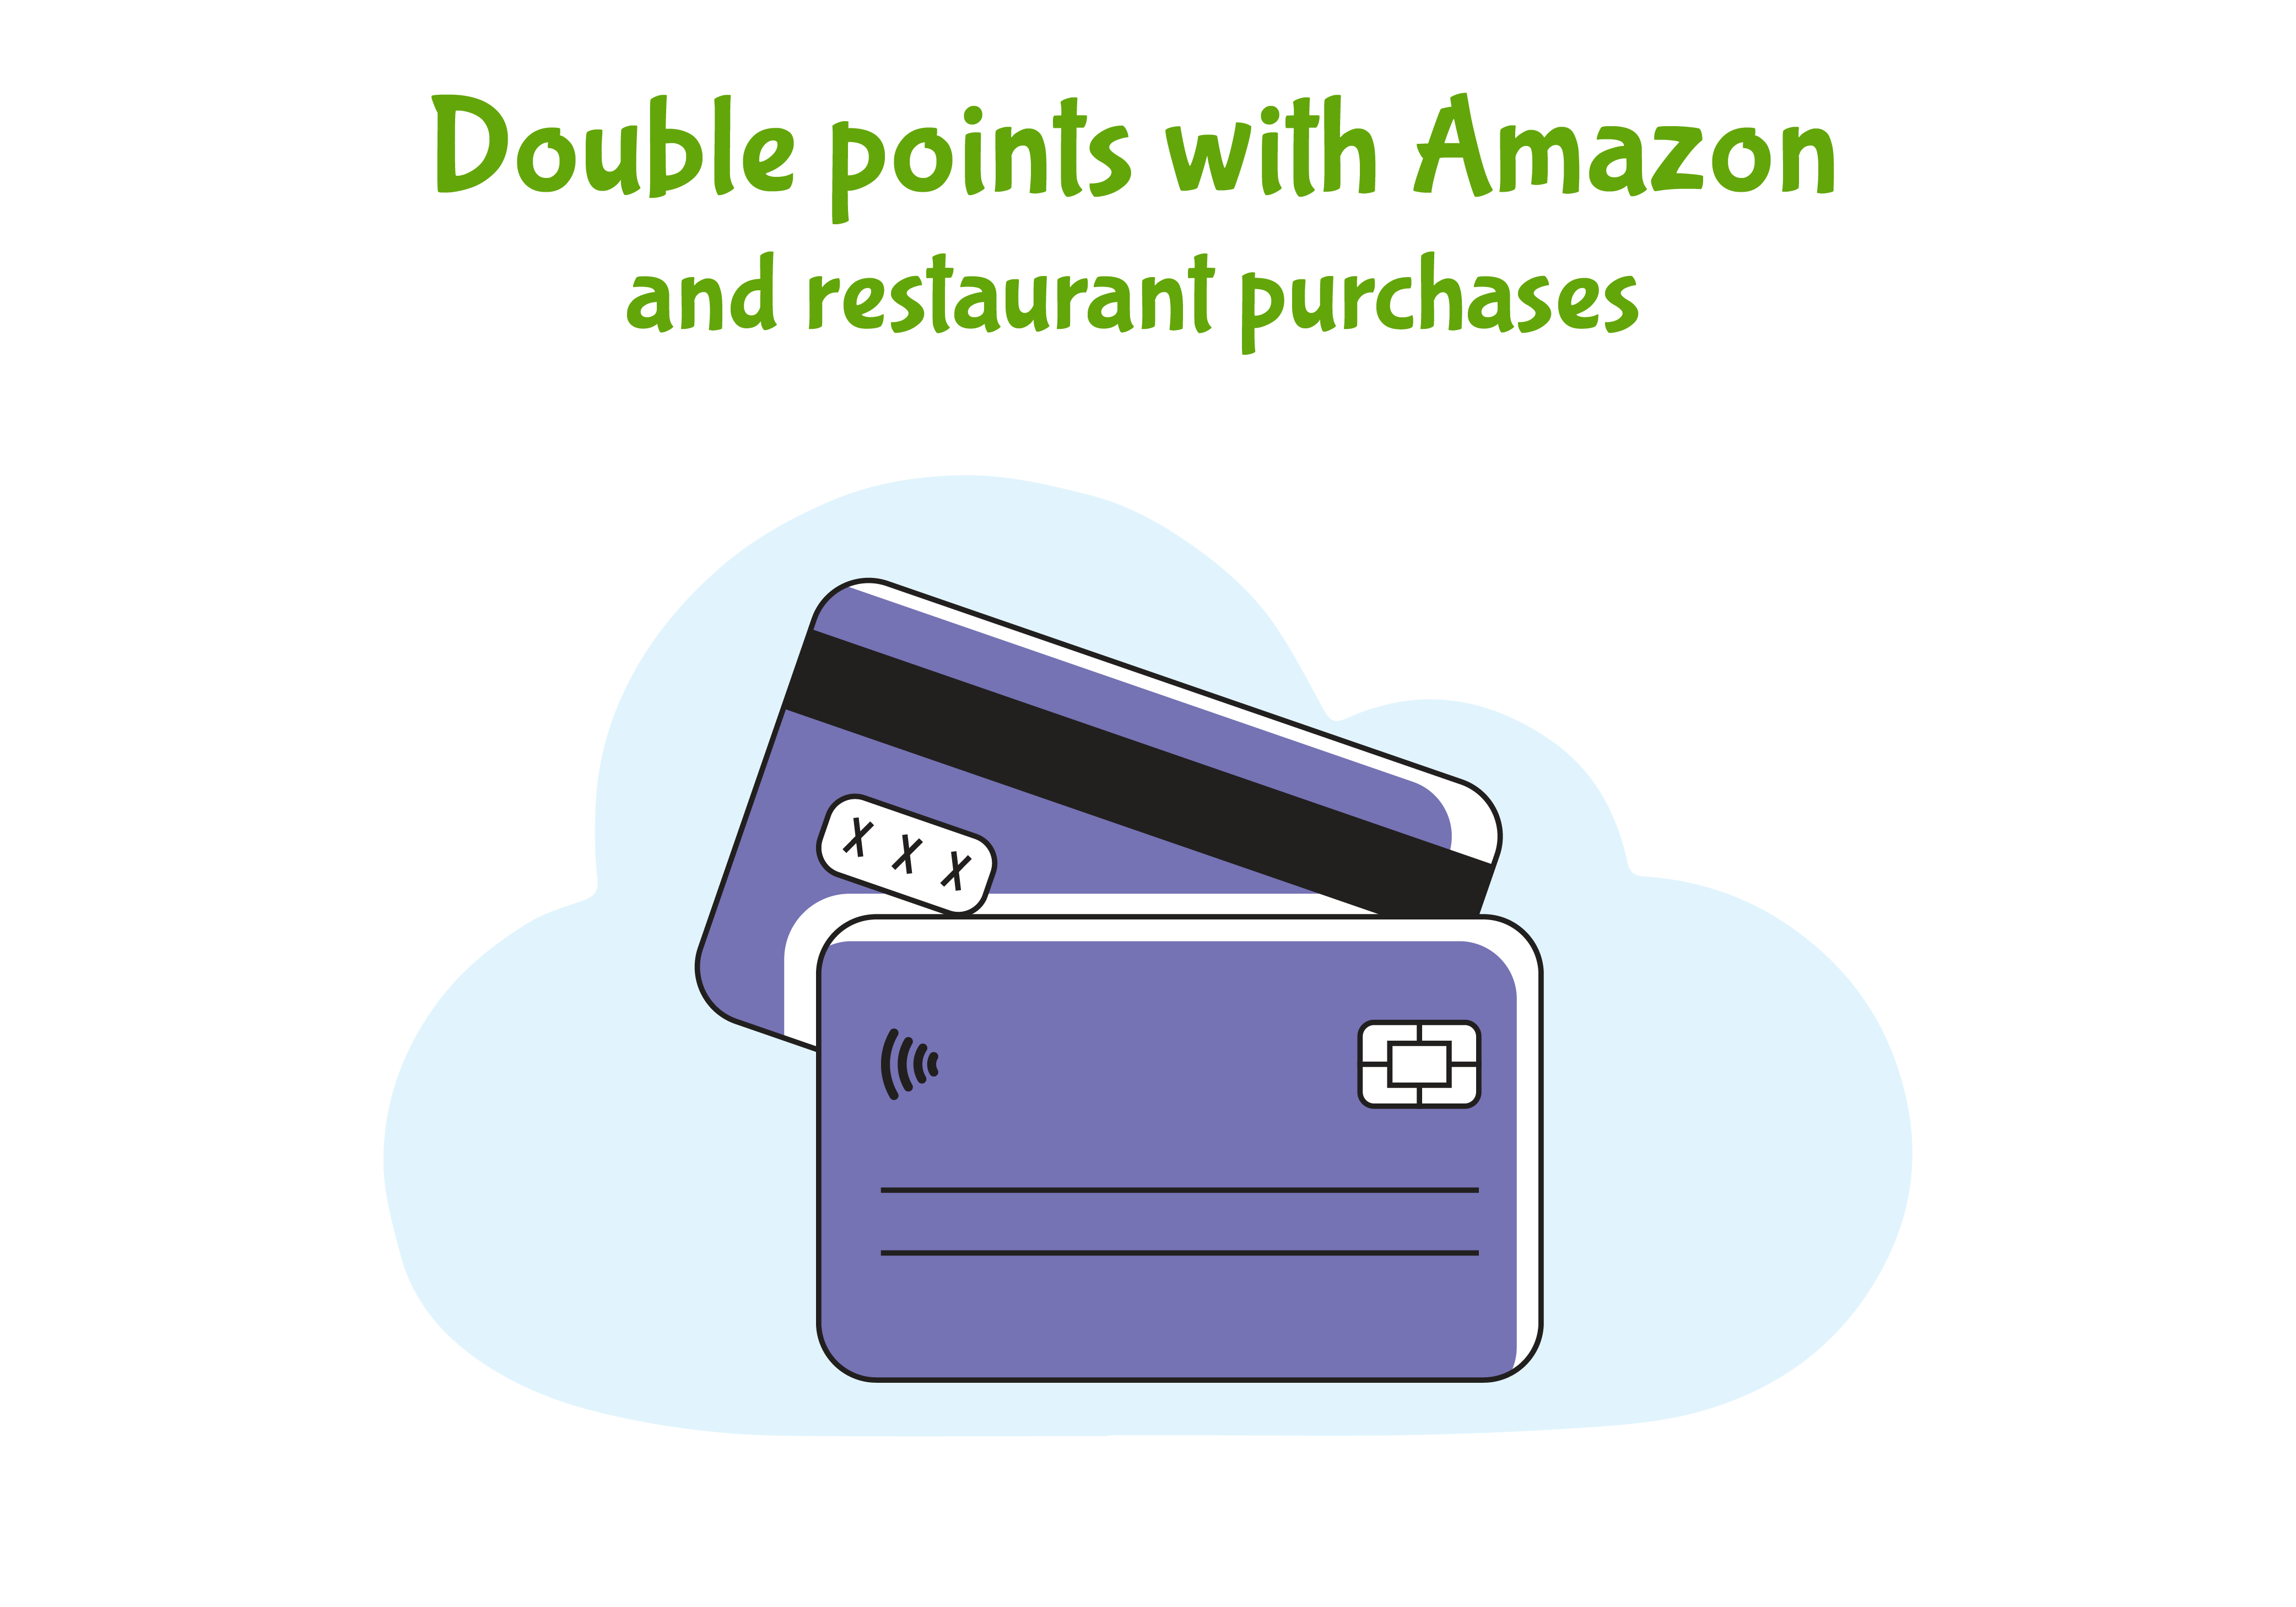 Double points with Amazon and restaurant purchases